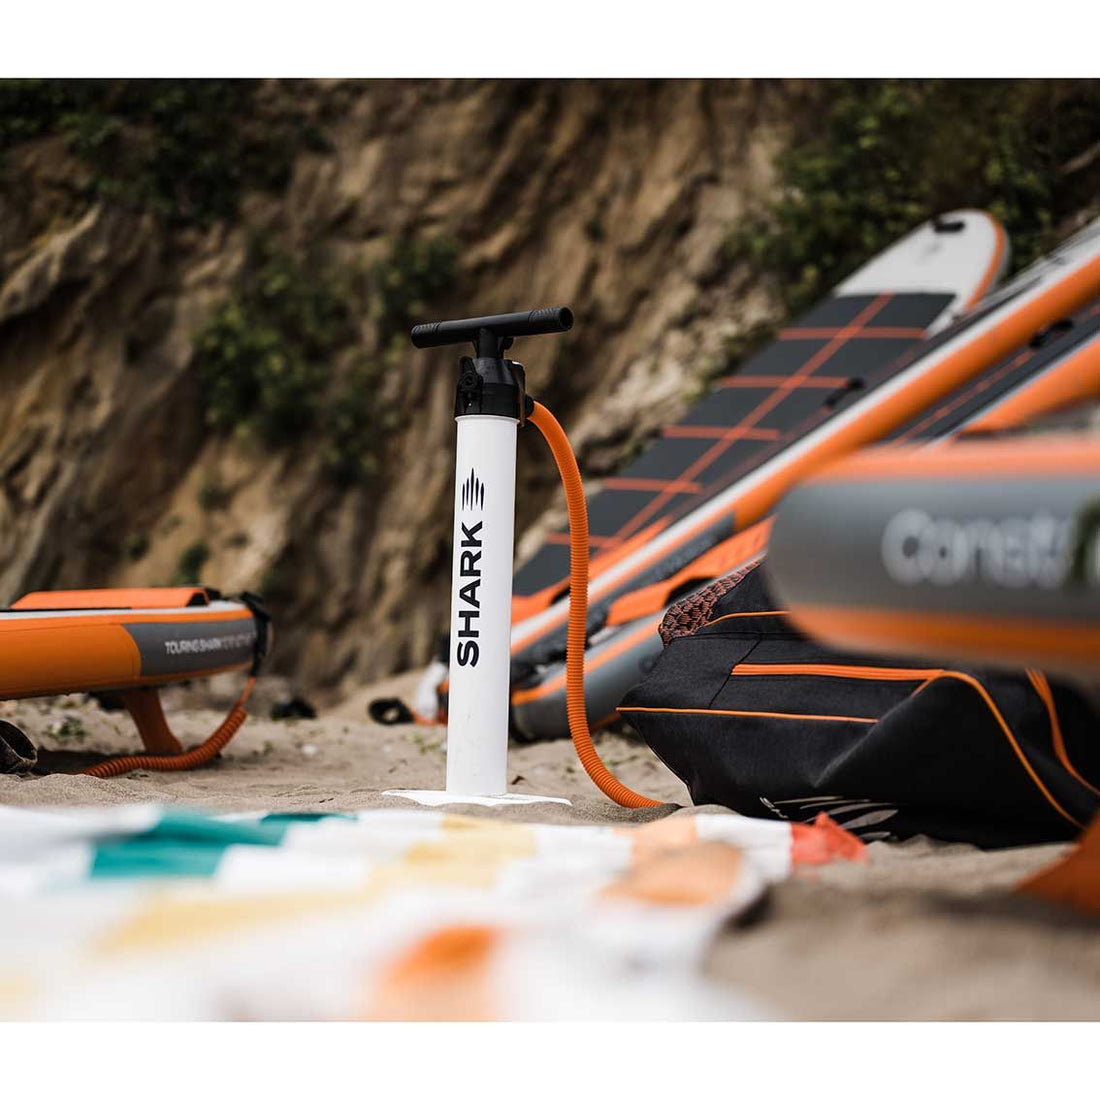 A QUICK GUIDE TO SETTING UP YOUR SHARK SUP - 2022